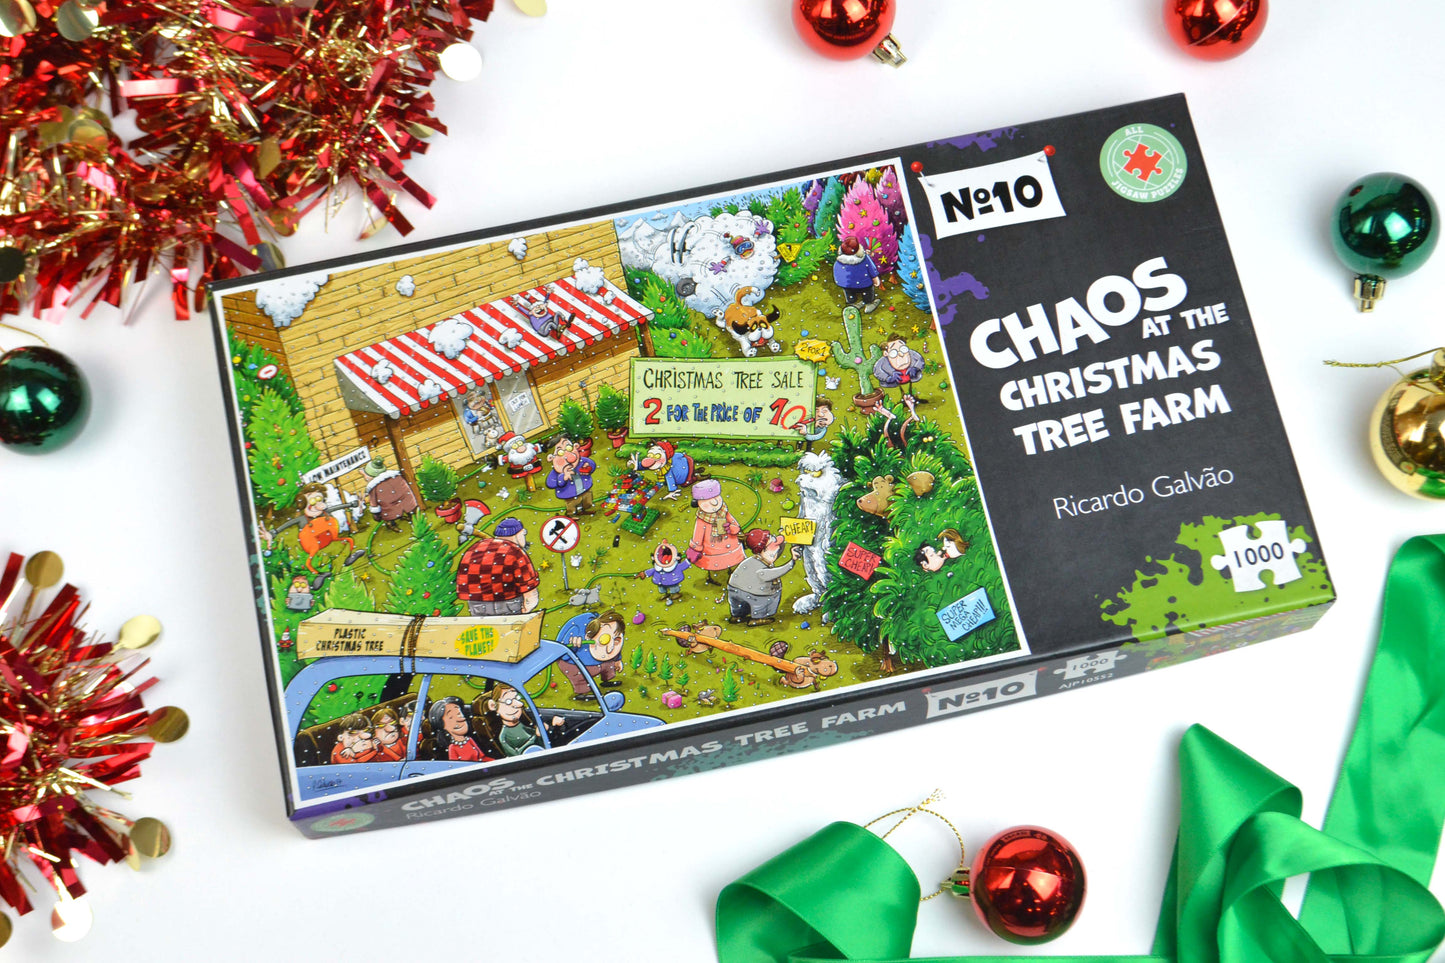 Chaos at Christmas Tree Farm - No. 10 1000 or 500 Piece Jigsaw Puzzle